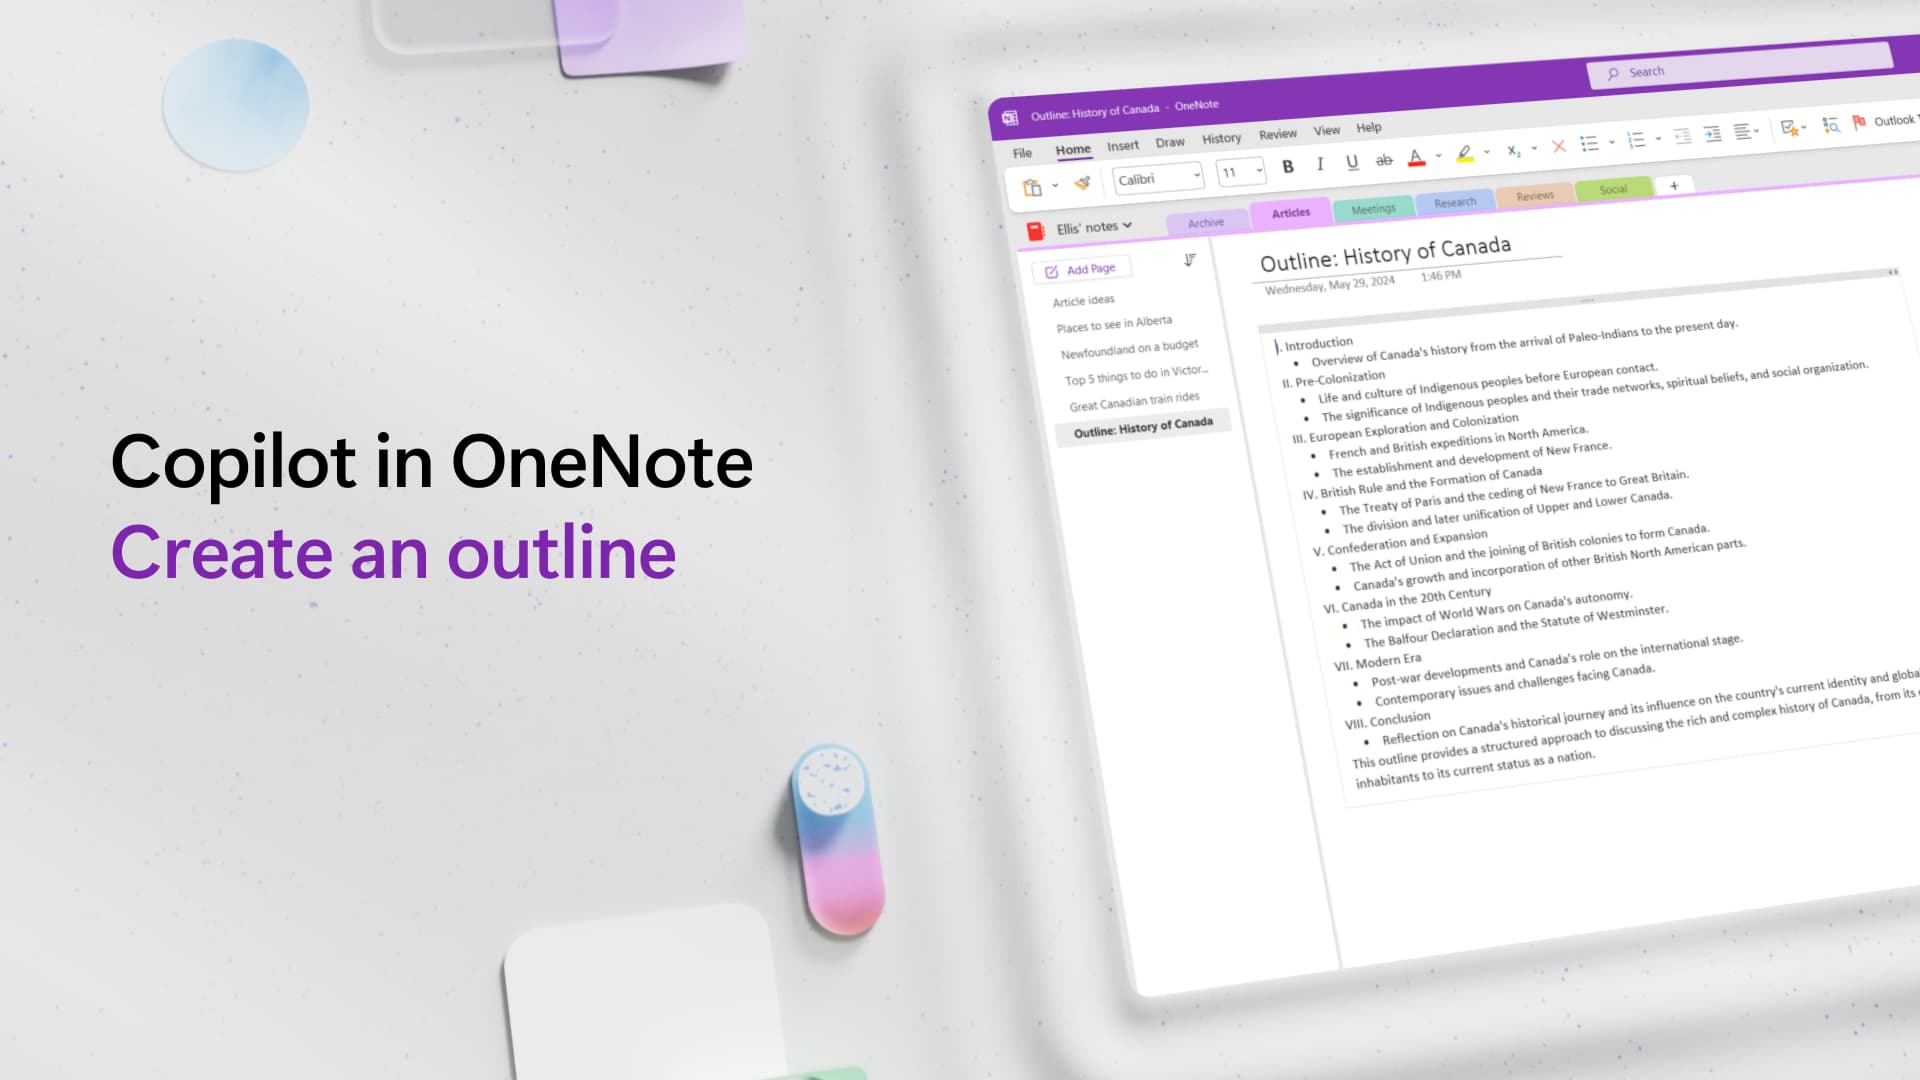 Video: Create an outline with Copilot in OneNote